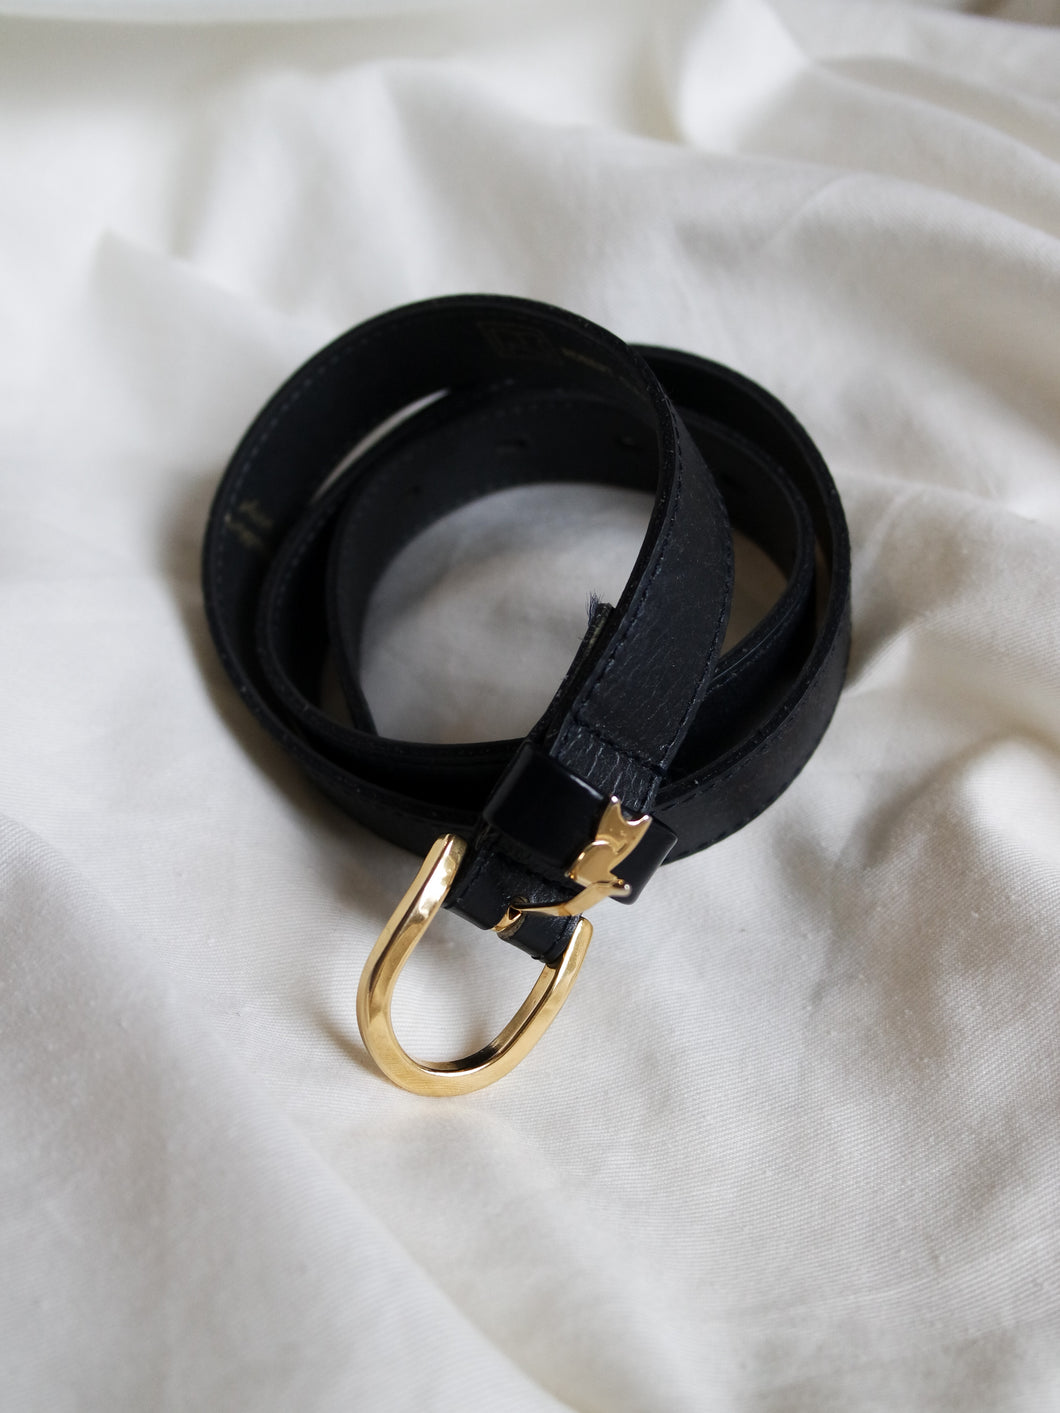 ROBERT CLARENCE leather belt